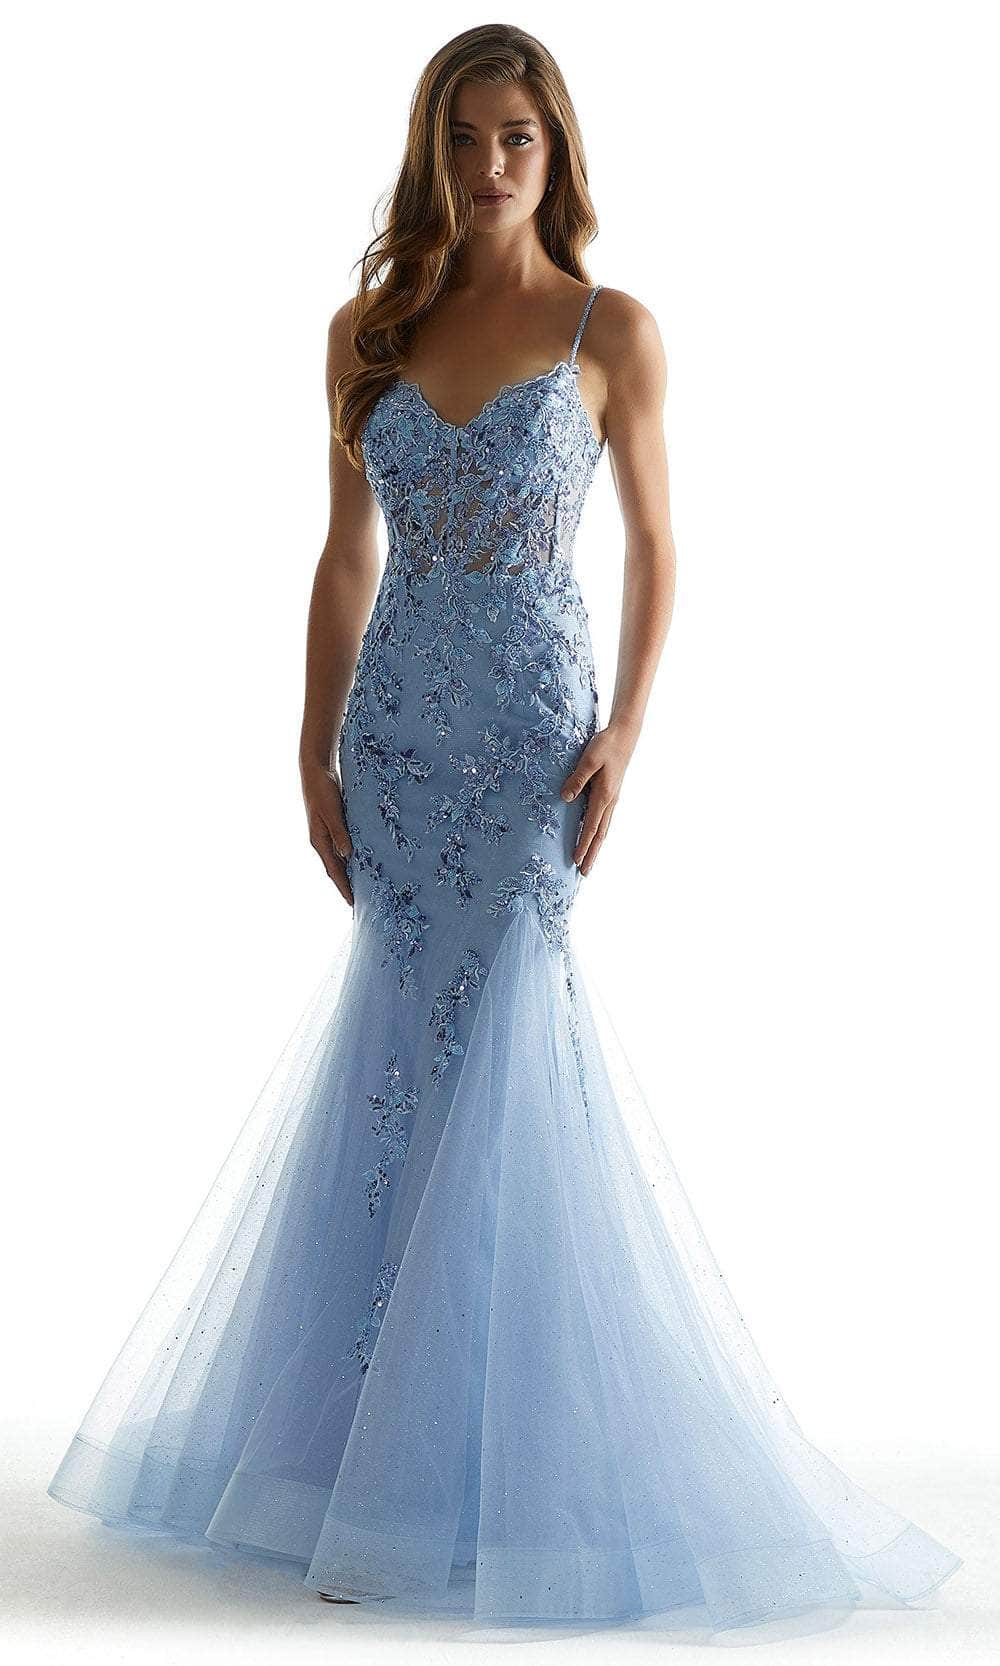 Image of Mori Lee 49043 - Embroidered Sleeveless Prom Dress